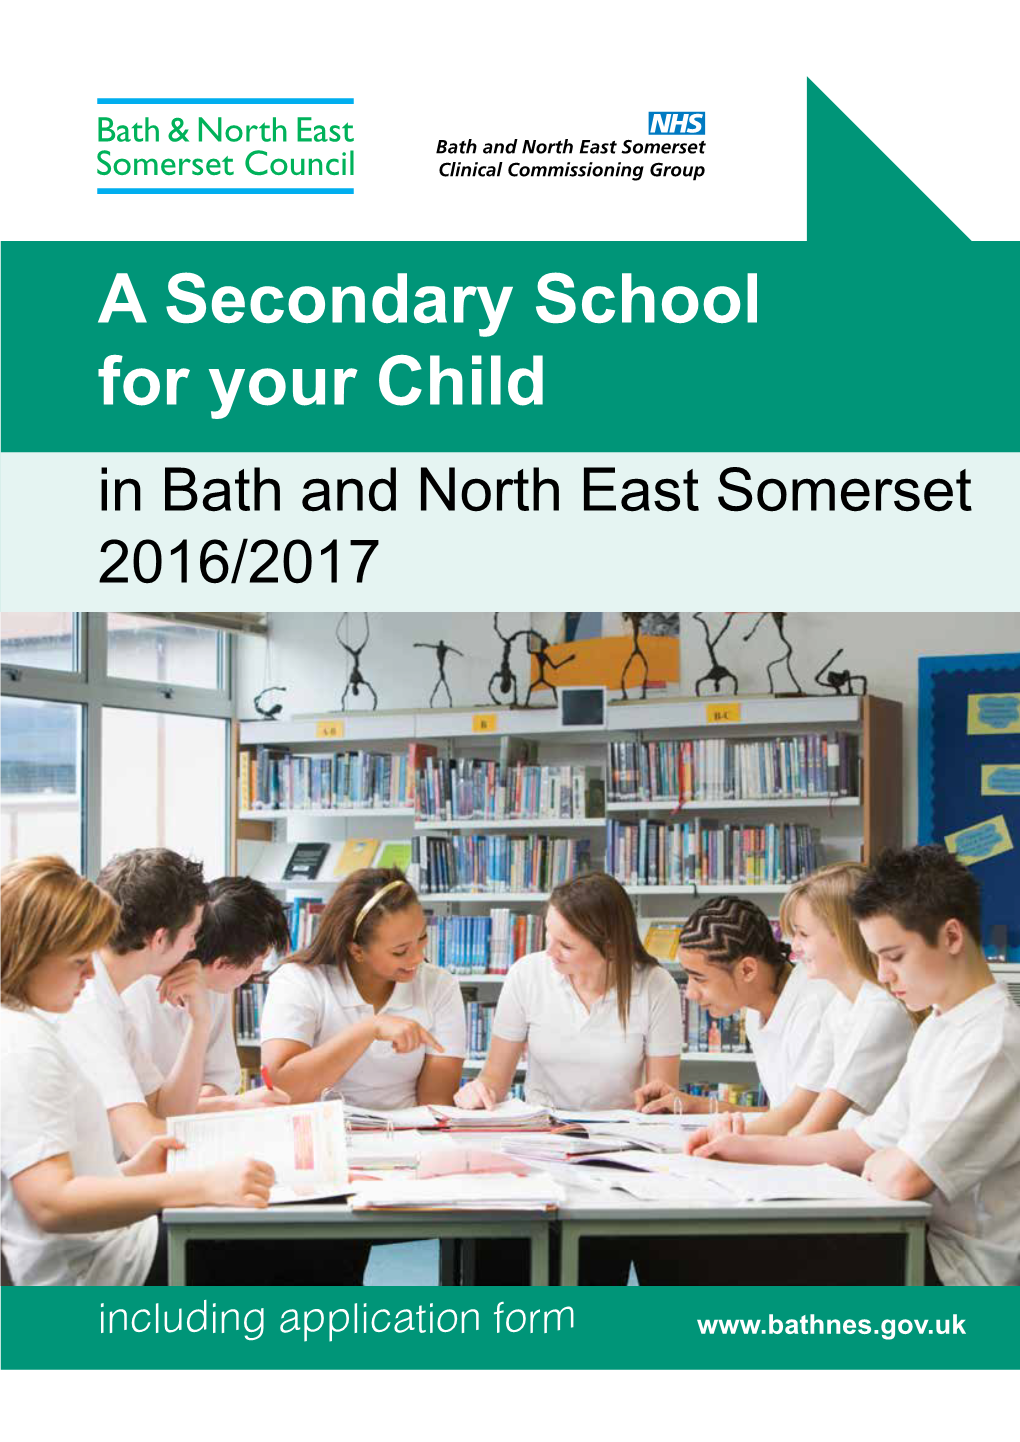 A Secondary School for Your Child in Bath and North East Somerset 2016/2017